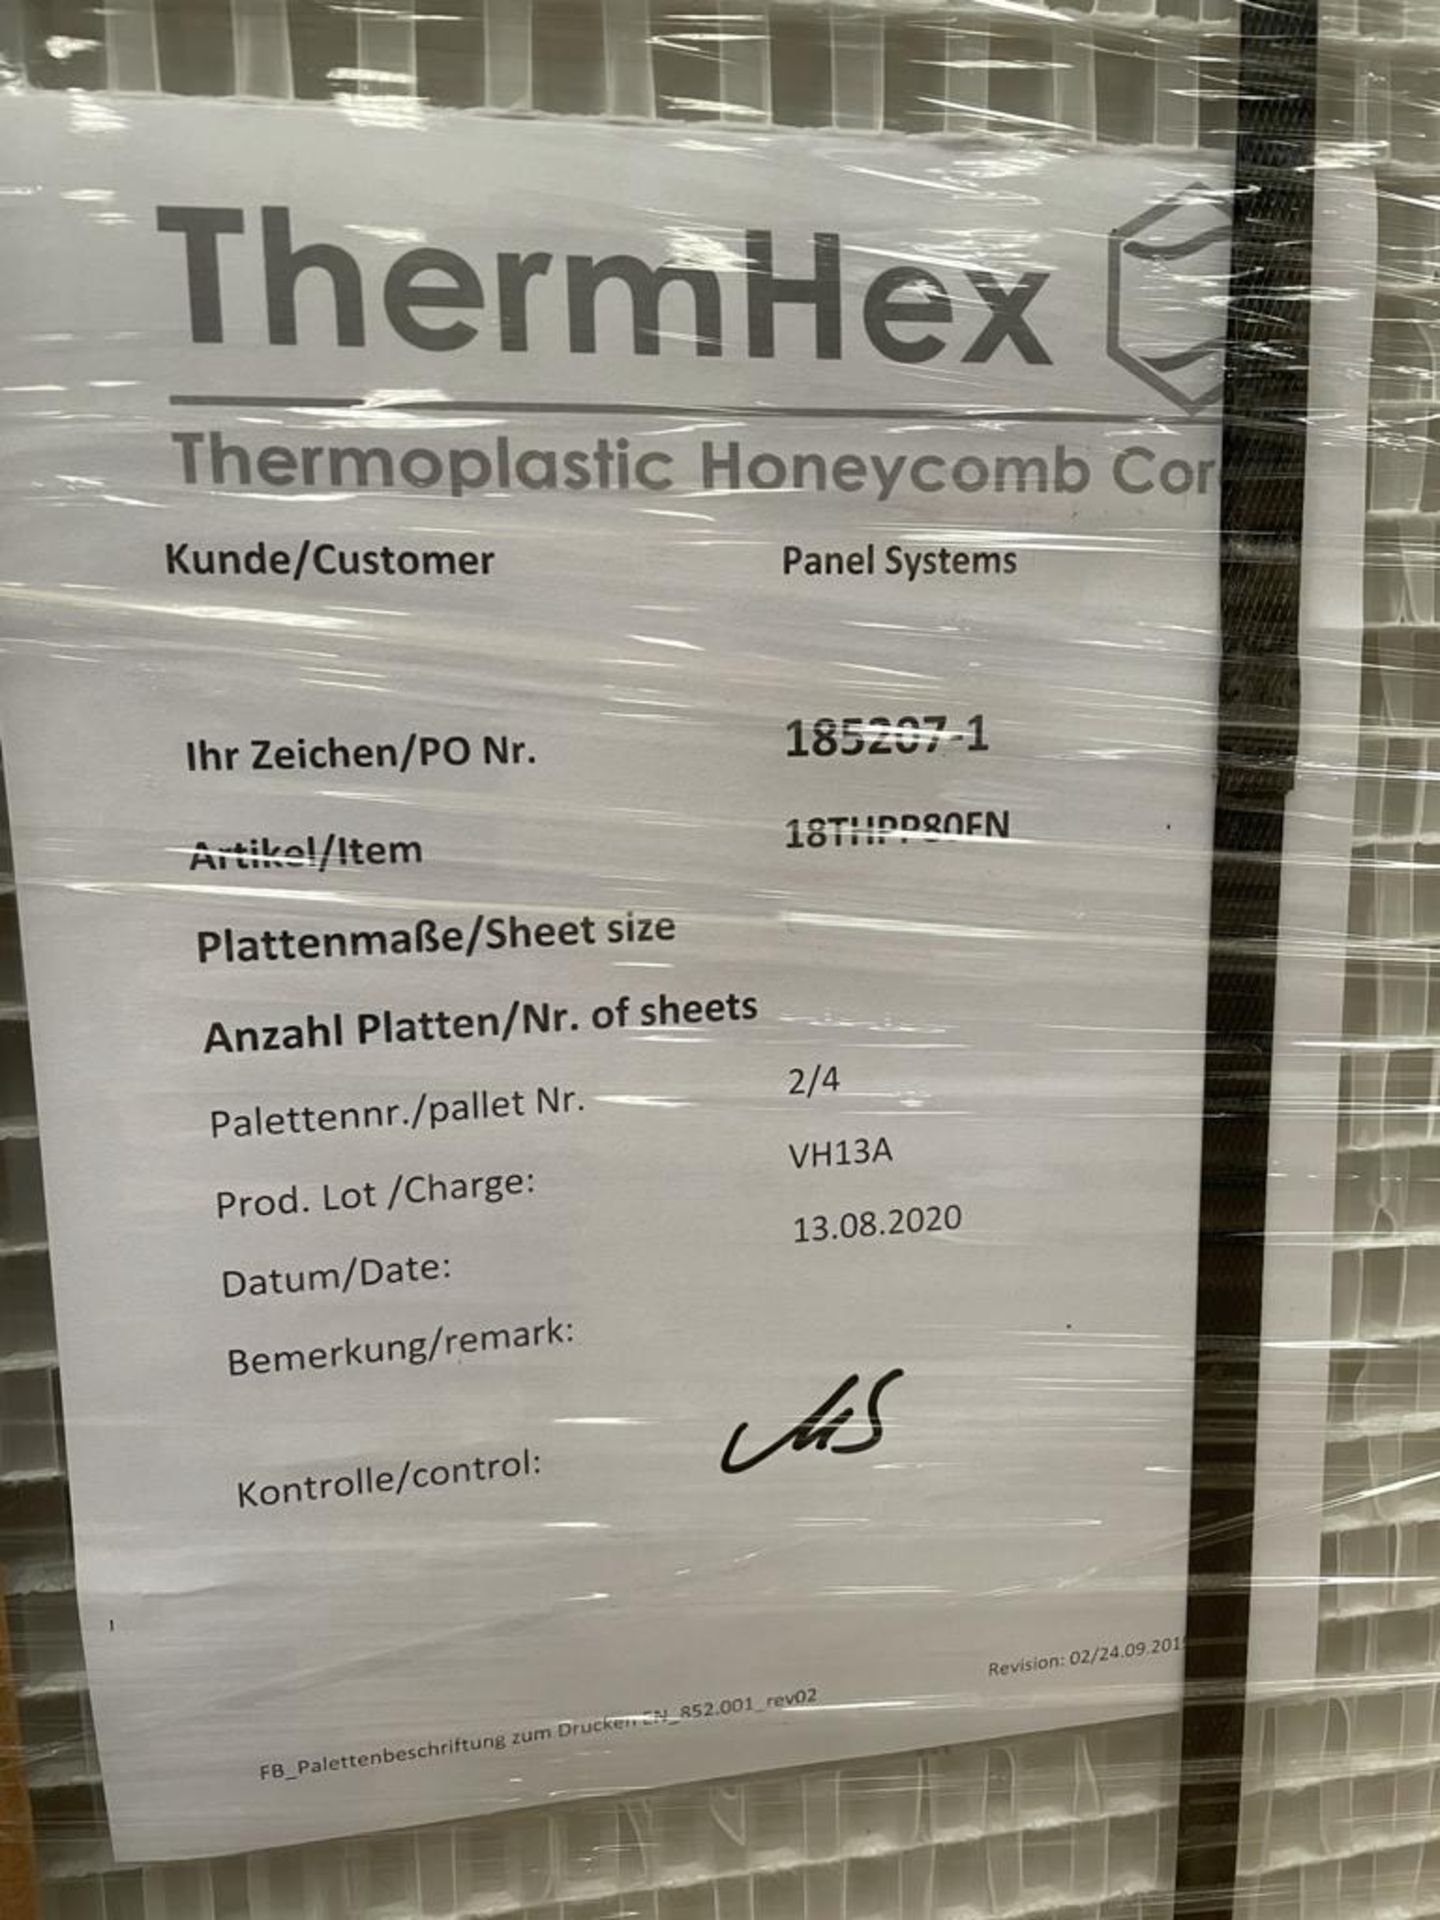 50 x ThermHex Thermoplastic Honeycomb Core Panels - Size 693 x 1210 x 18mm - New Stock - Lightweight - Image 5 of 8